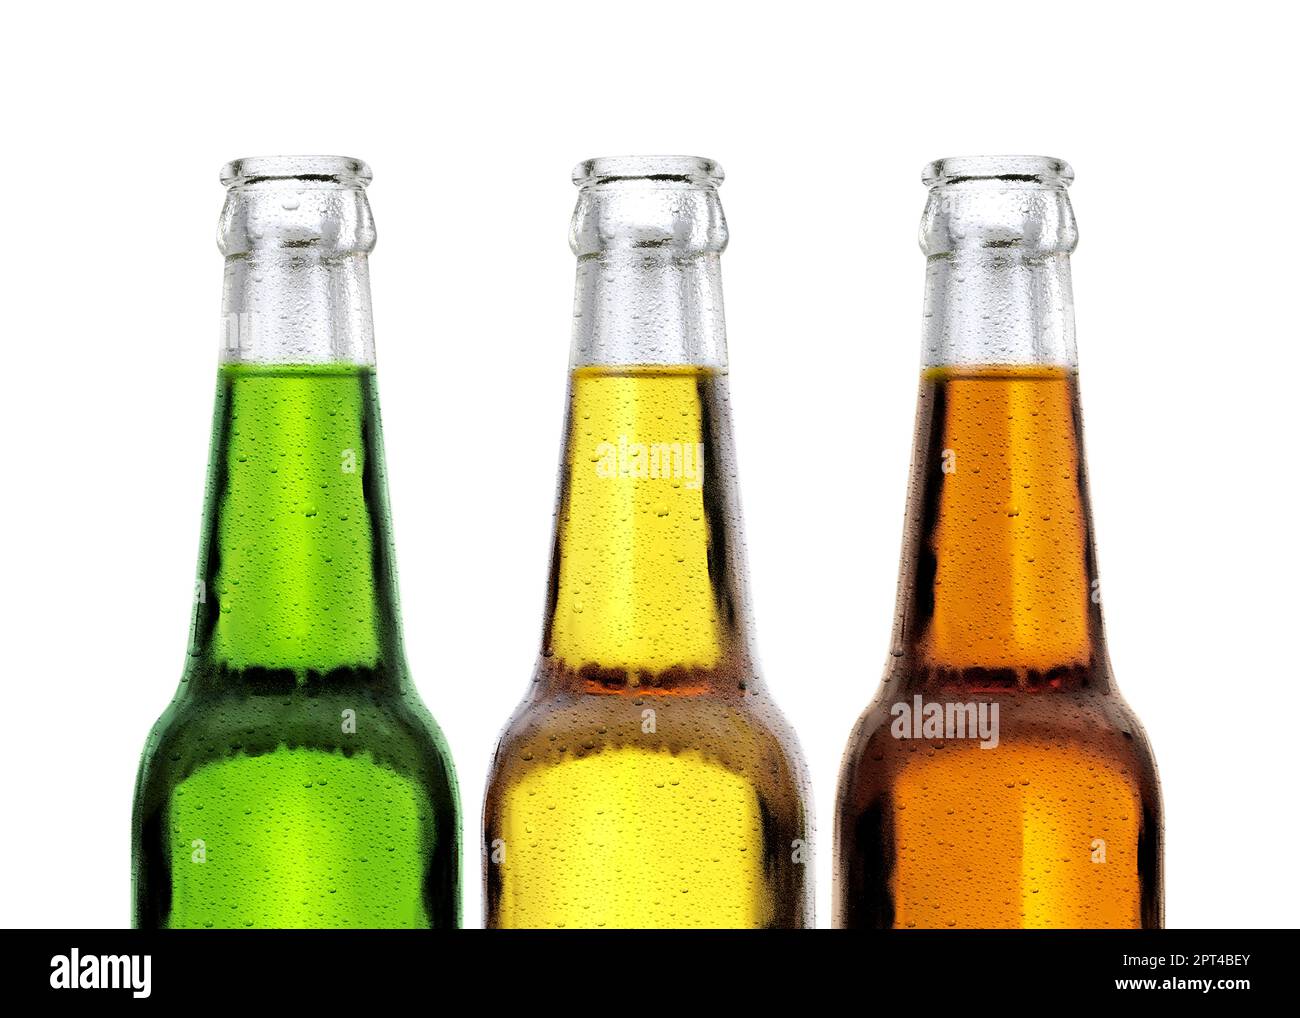 35,481 Alcool Test Images, Stock Photos, 3D objects, & Vectors